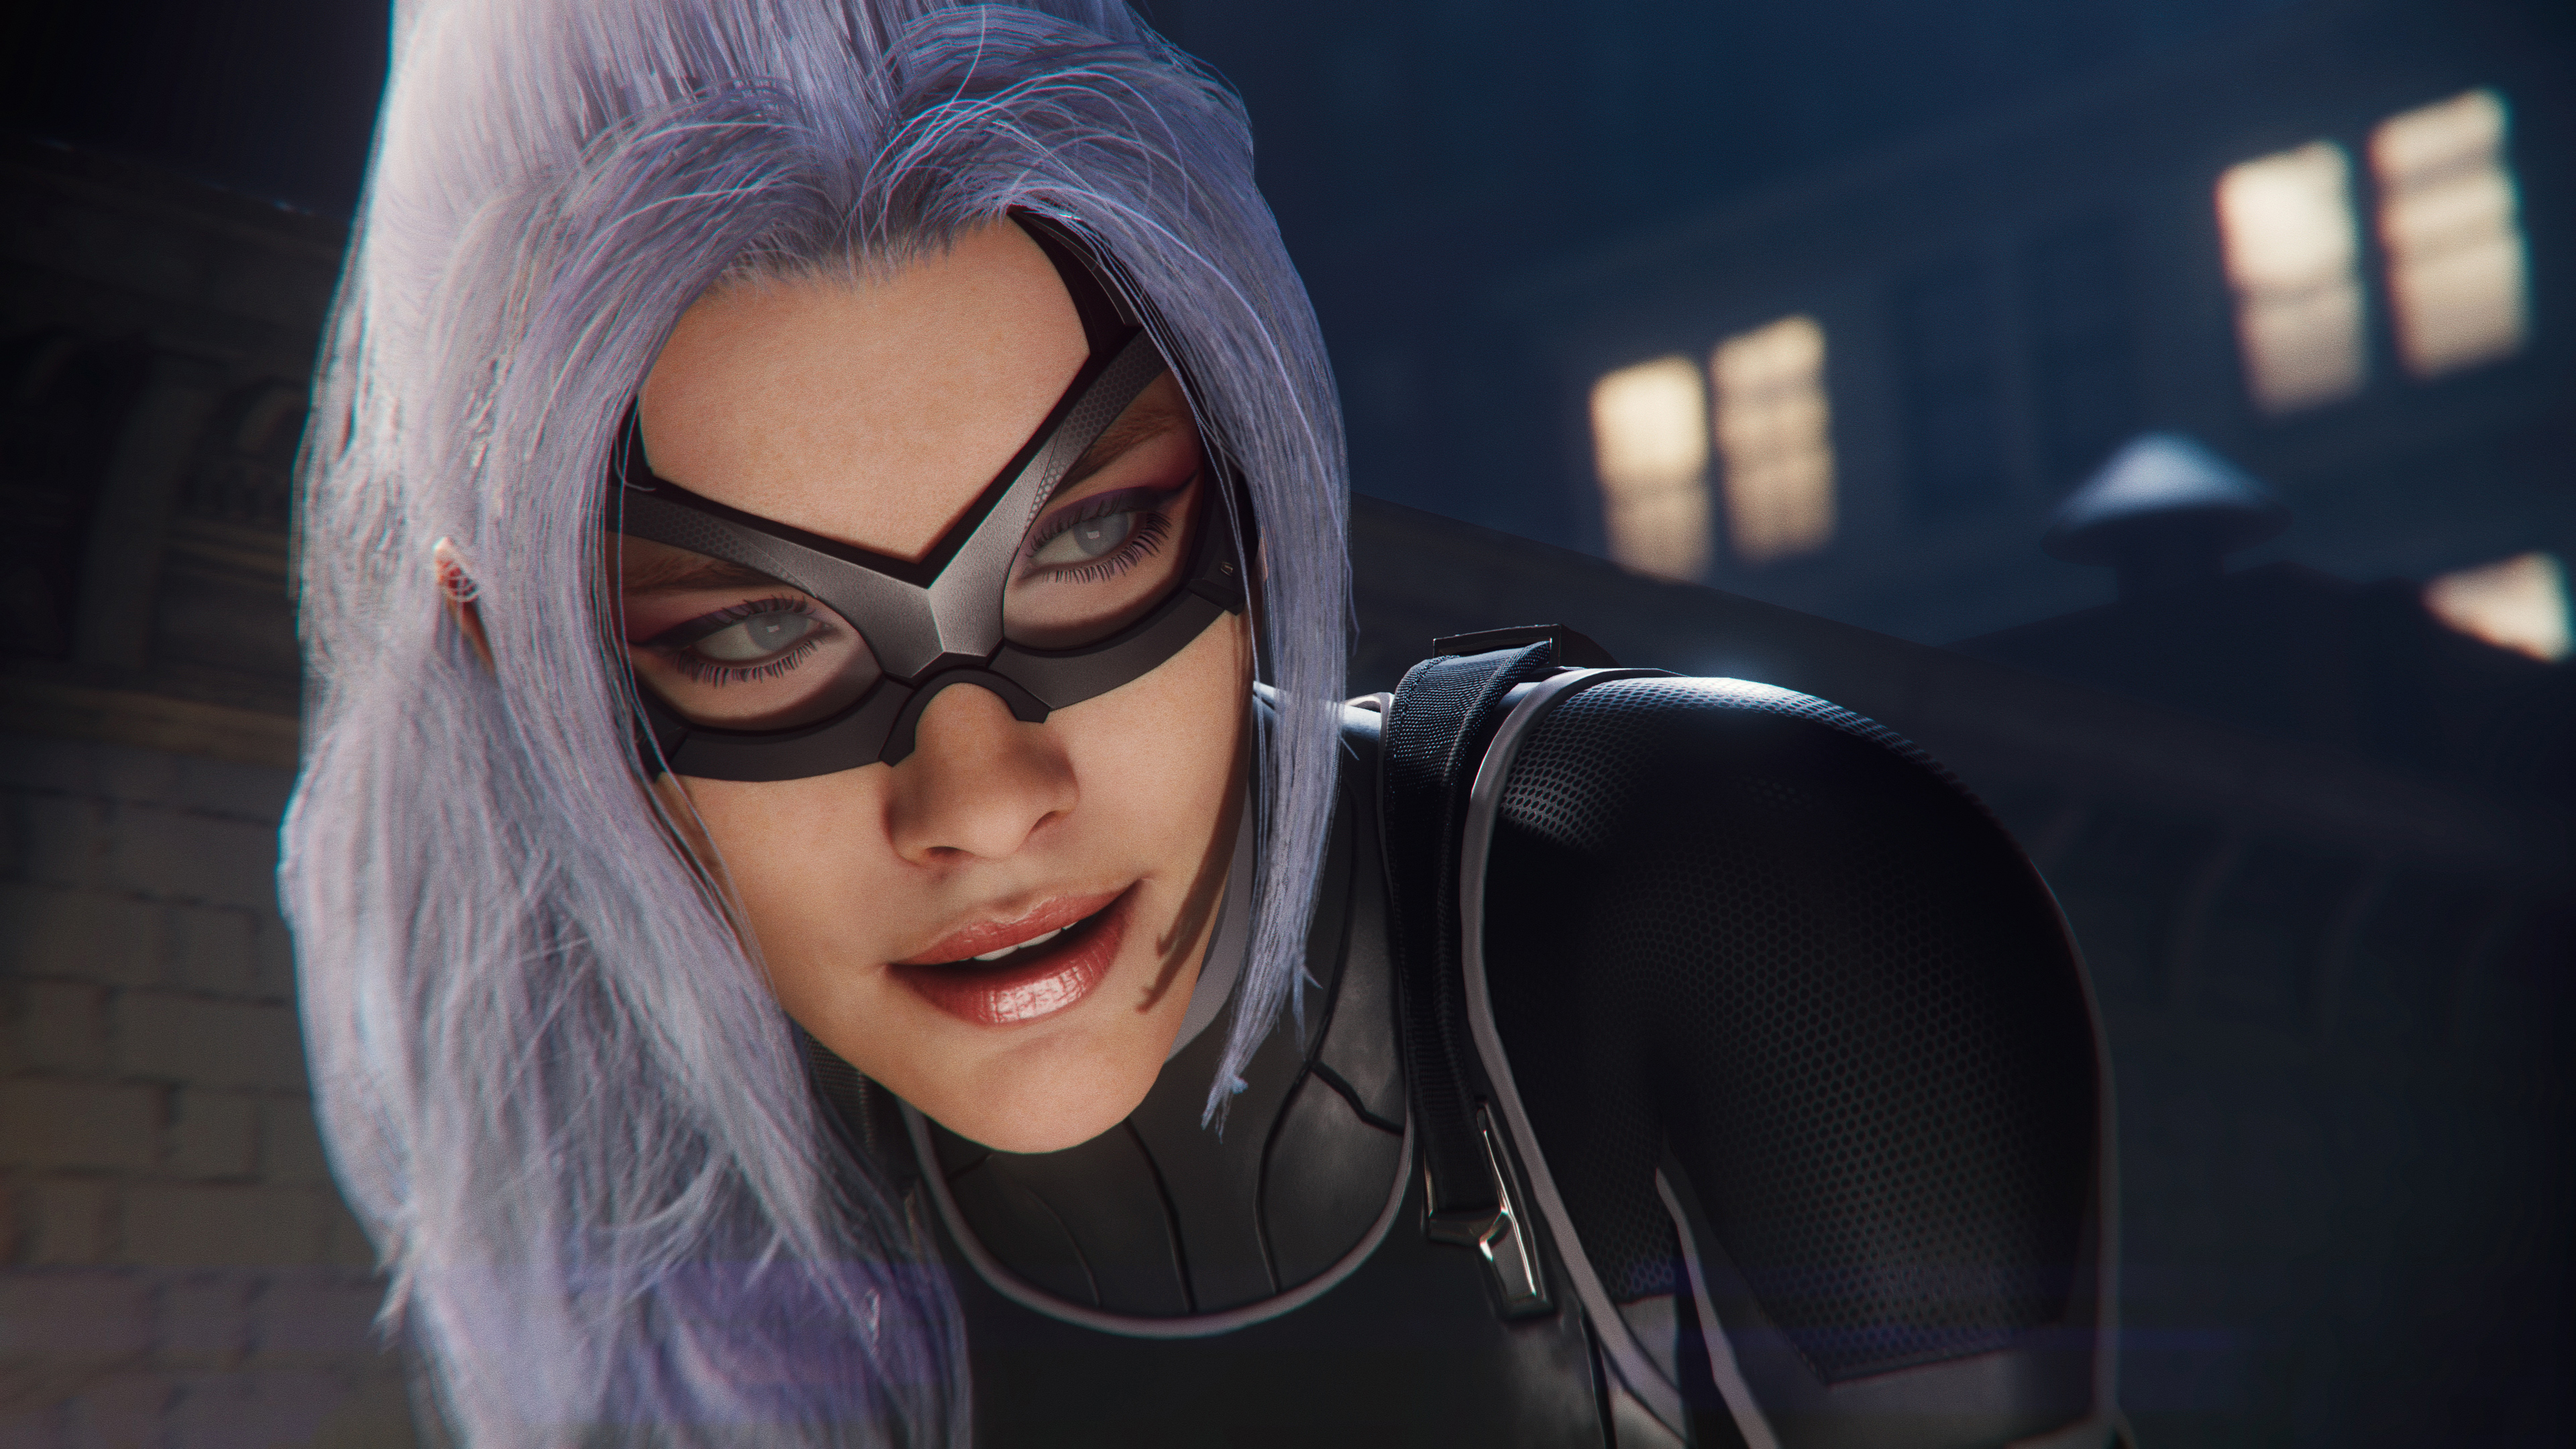 Felicia Hardy As Black Cat In Spiderman Ps4 Hd Games 4k Wallpapers Images Backgrounds